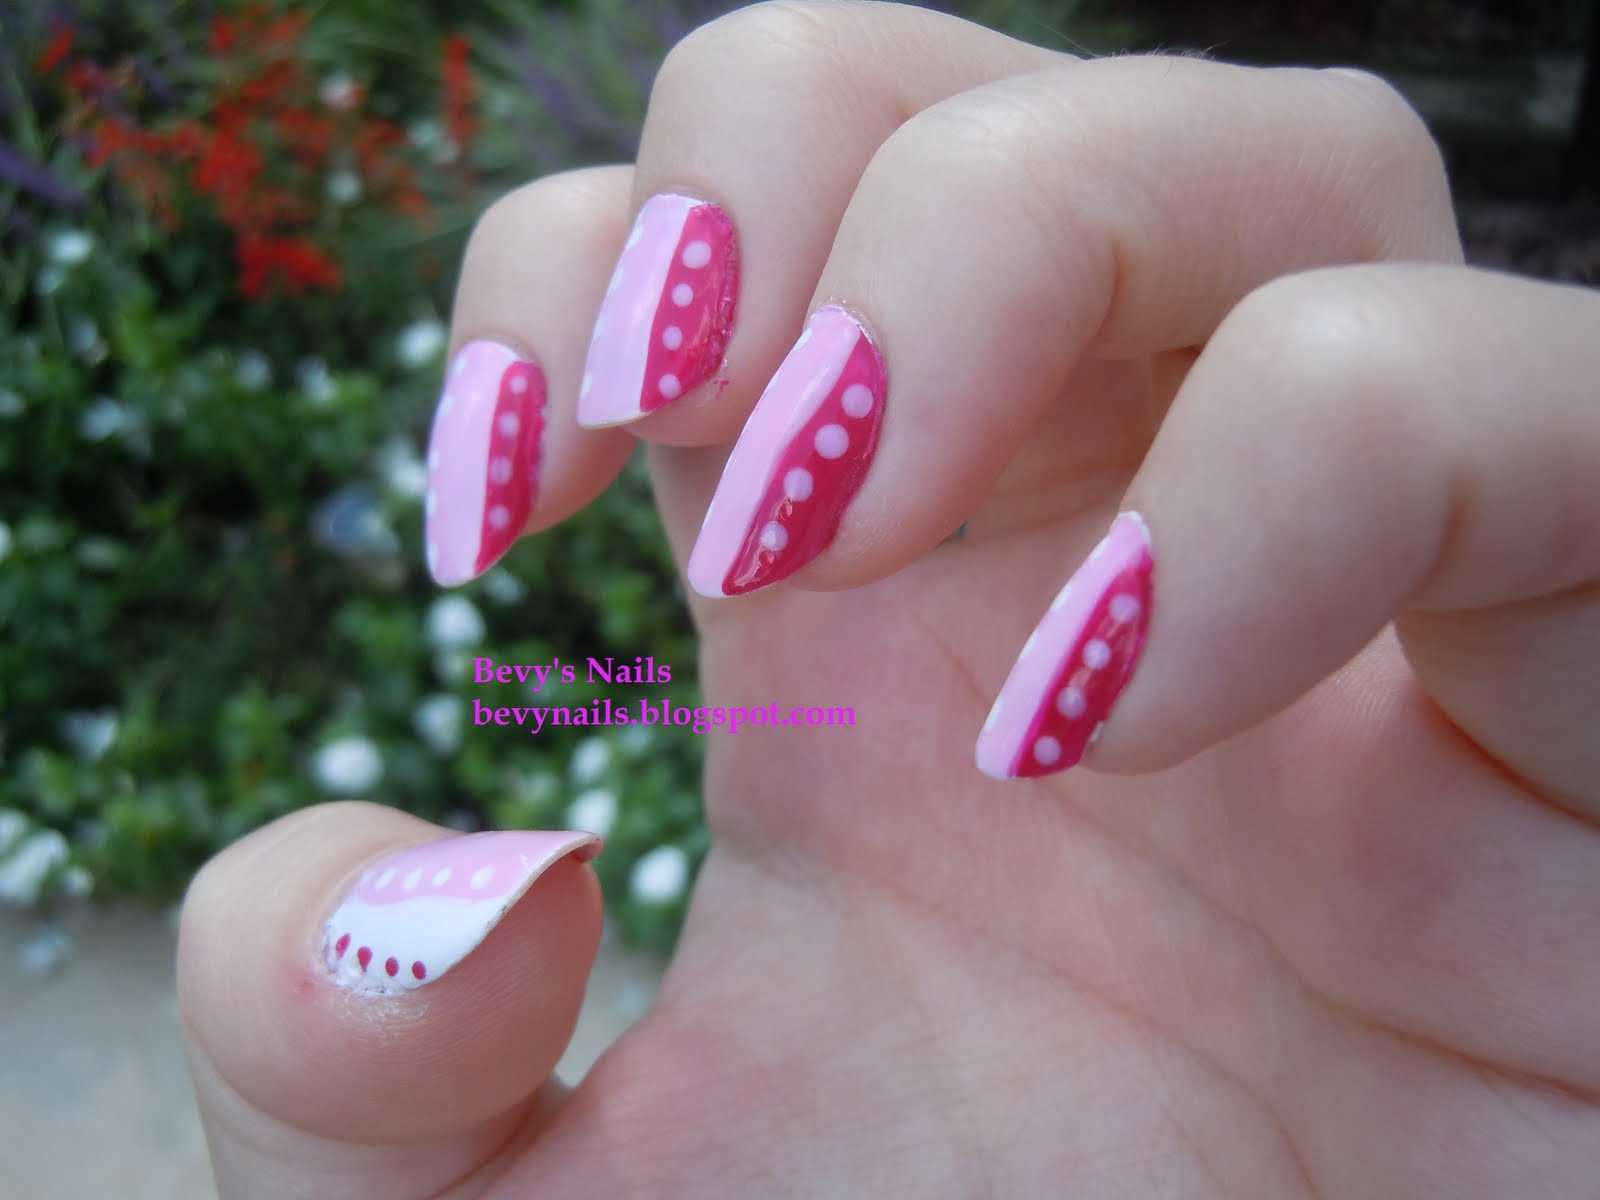 Bevy's Nails: Pink Wednesday Monochromatic Design with Dots